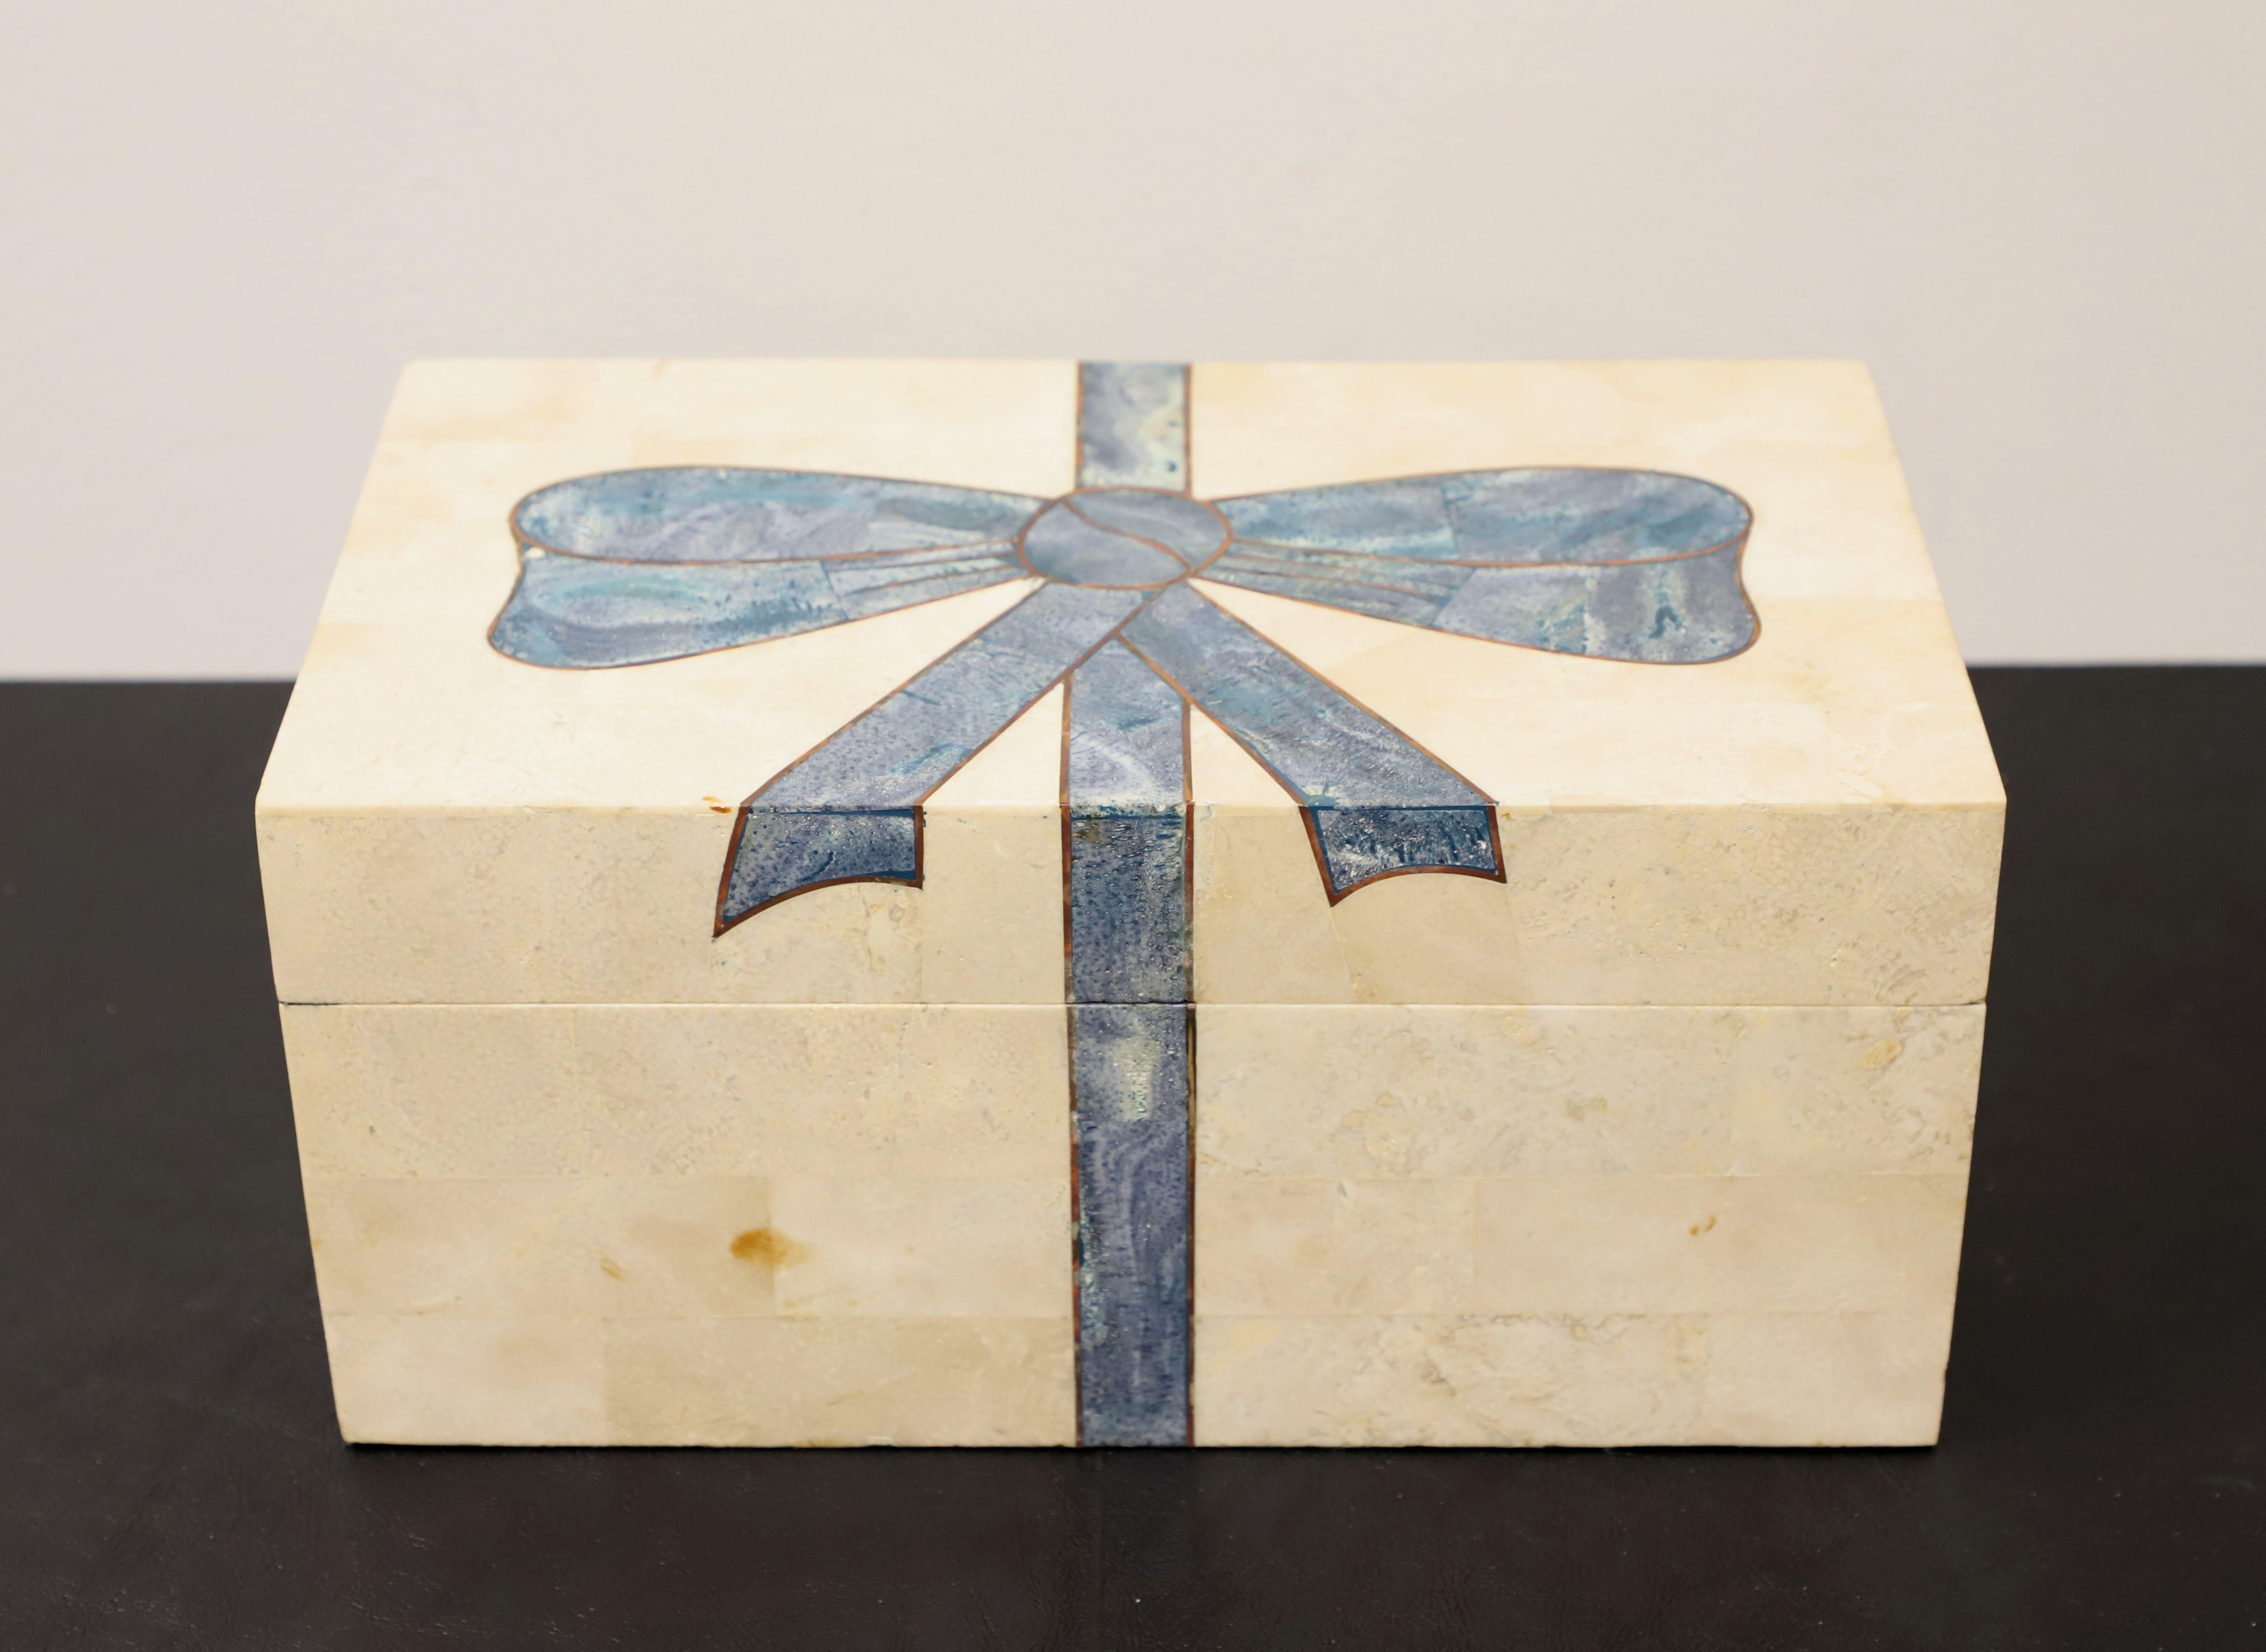 A trinket box in tessellated marble, possibly by Maitland Smith, though unmarked. Cream colored marble tiles with blue marble tiles forming a decorative bow in the center, ample black felt lined interior, brass hinge hardware, fabric strap held lid,